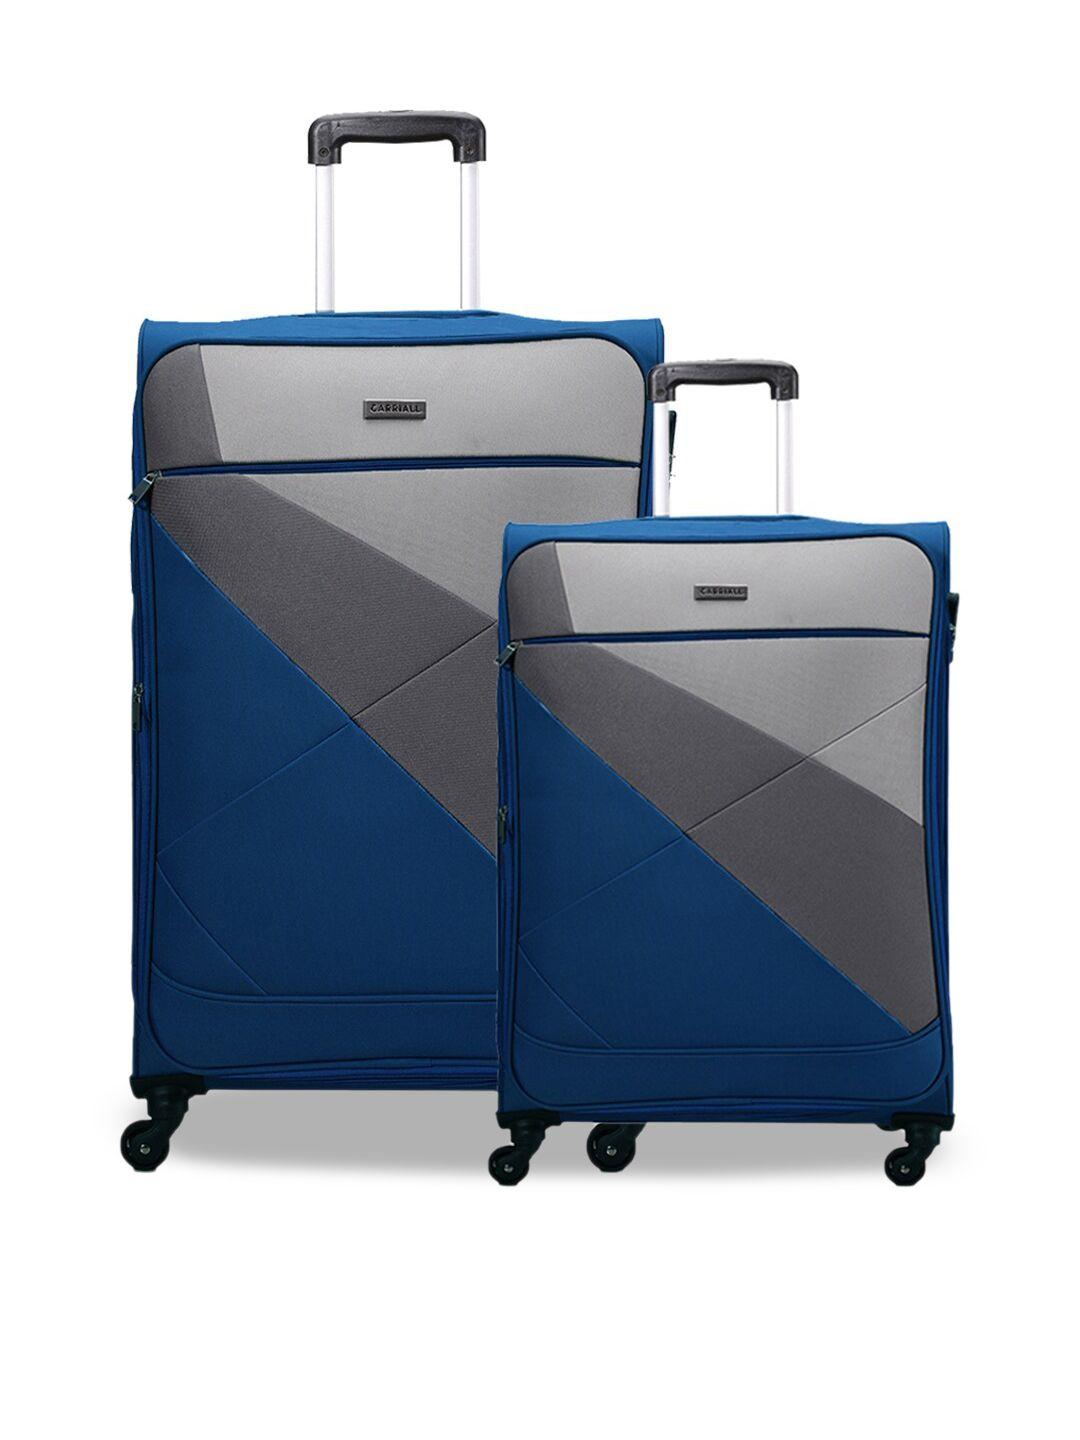 carriall set of 2 navy blue
solid soft-sided trolley suitcases